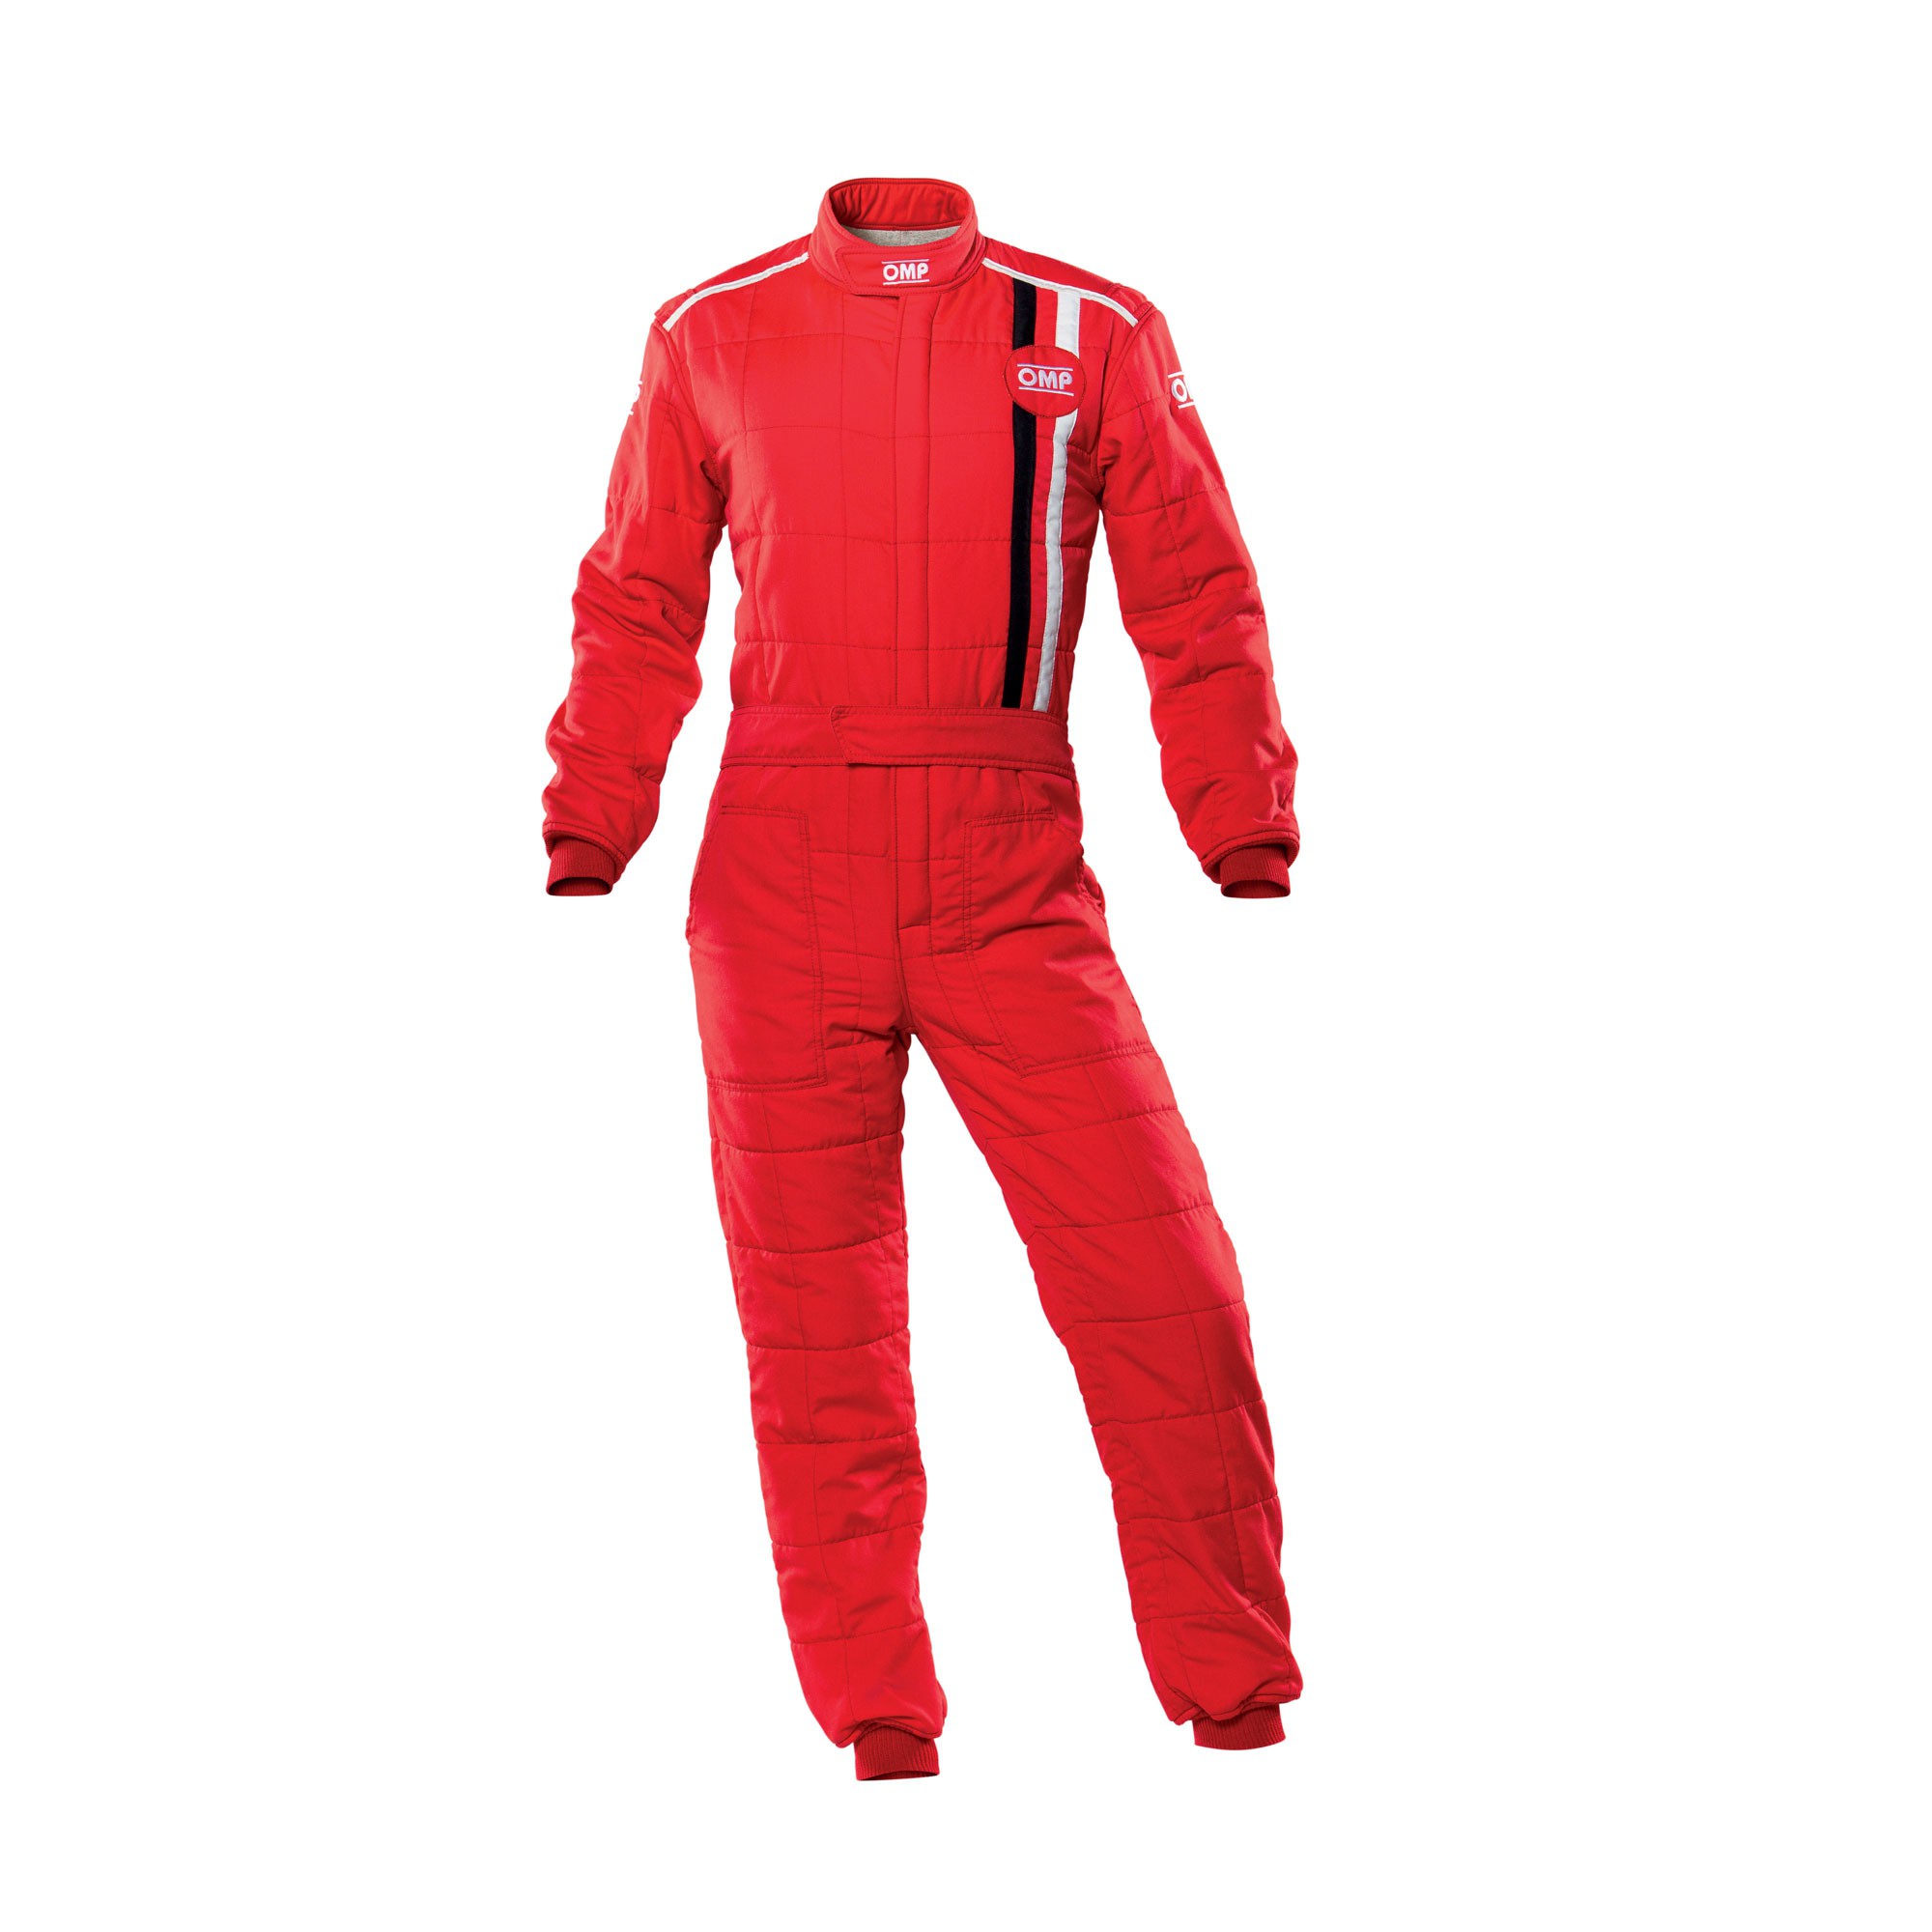 CLASSIC OVERALL my2021 RED SIZE 46 FIA 8856-2018